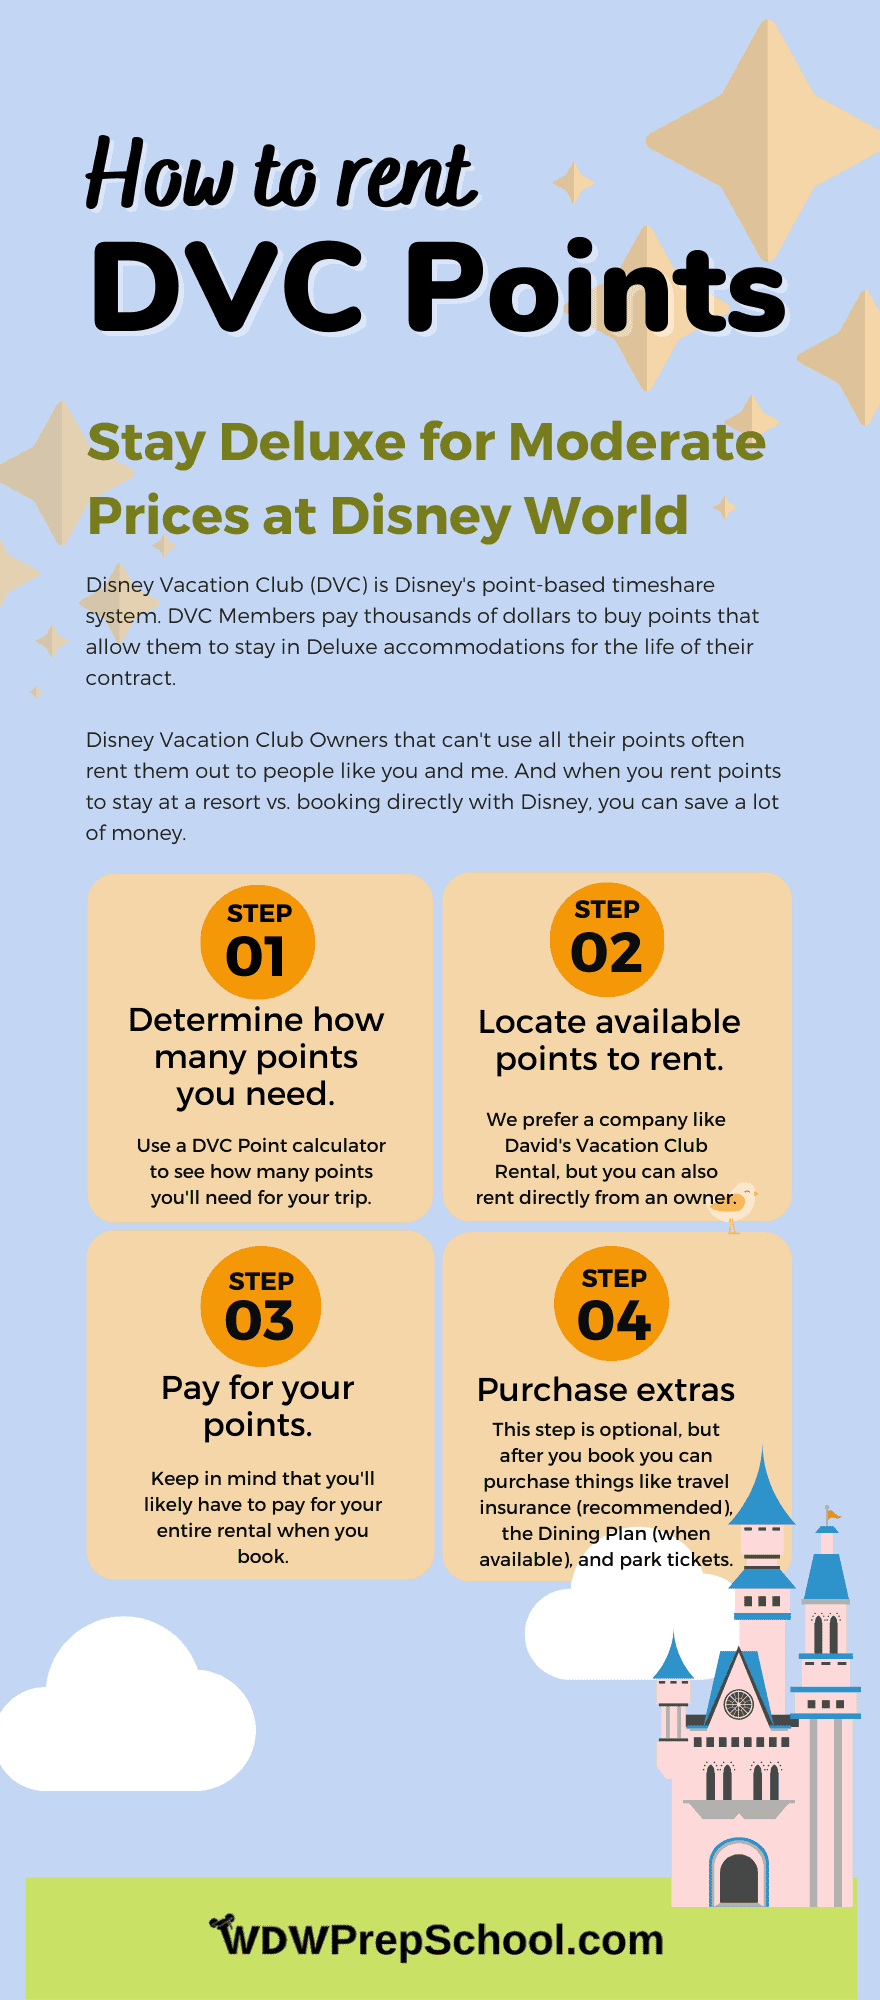 How to Rent DVC Points infographic